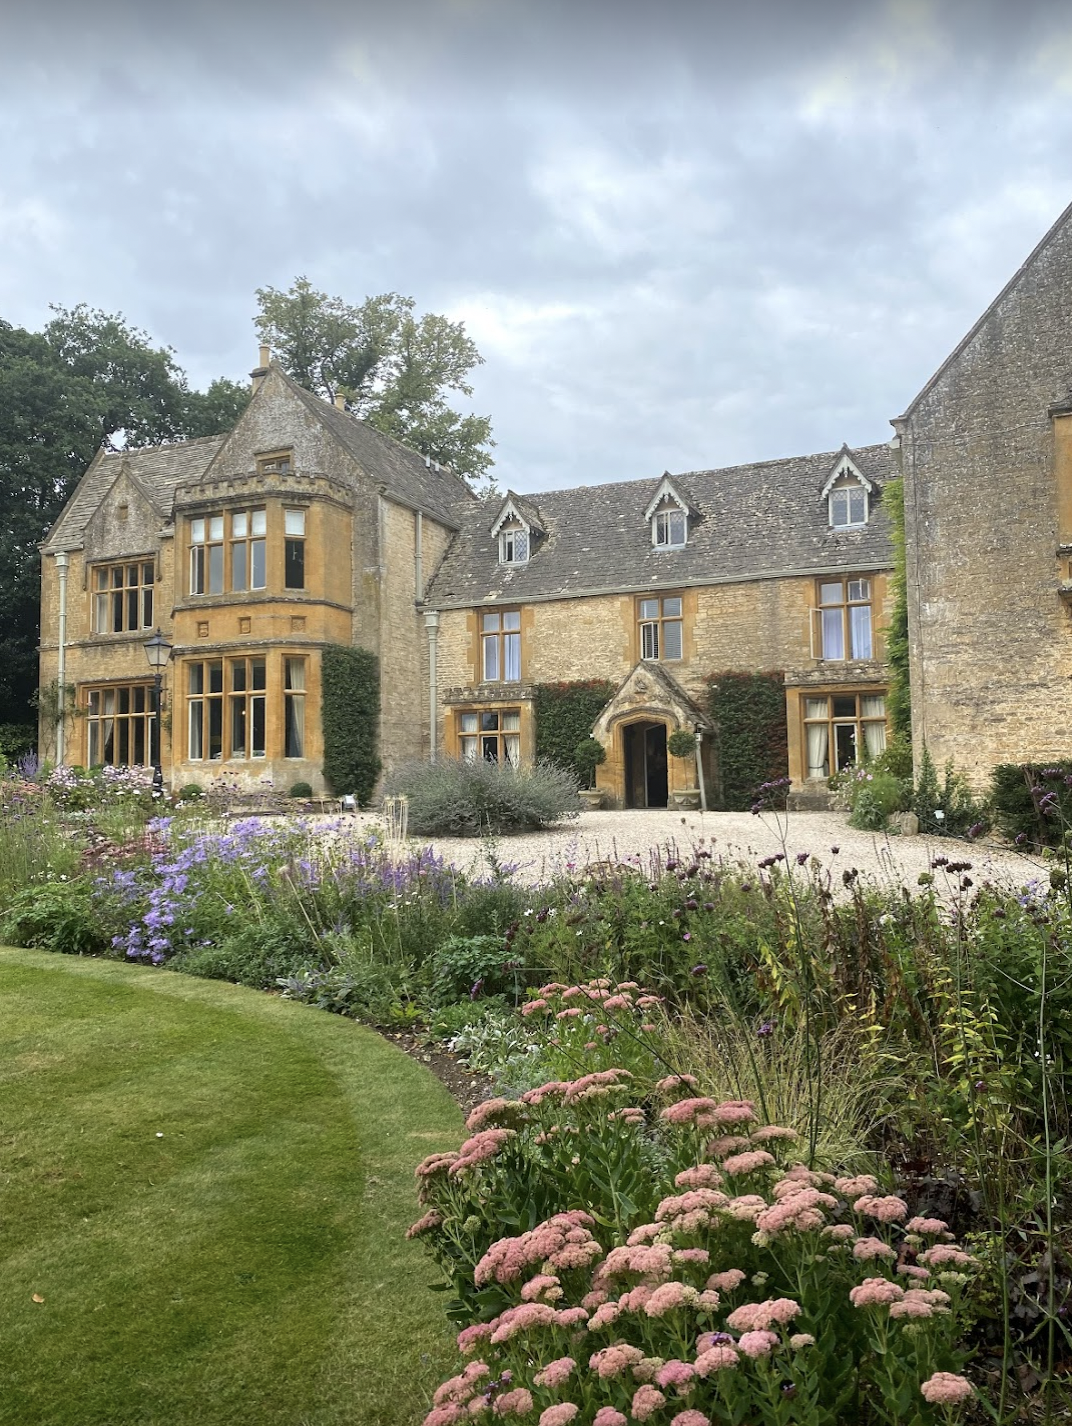 Lords of the Manor, Upper Slaughter